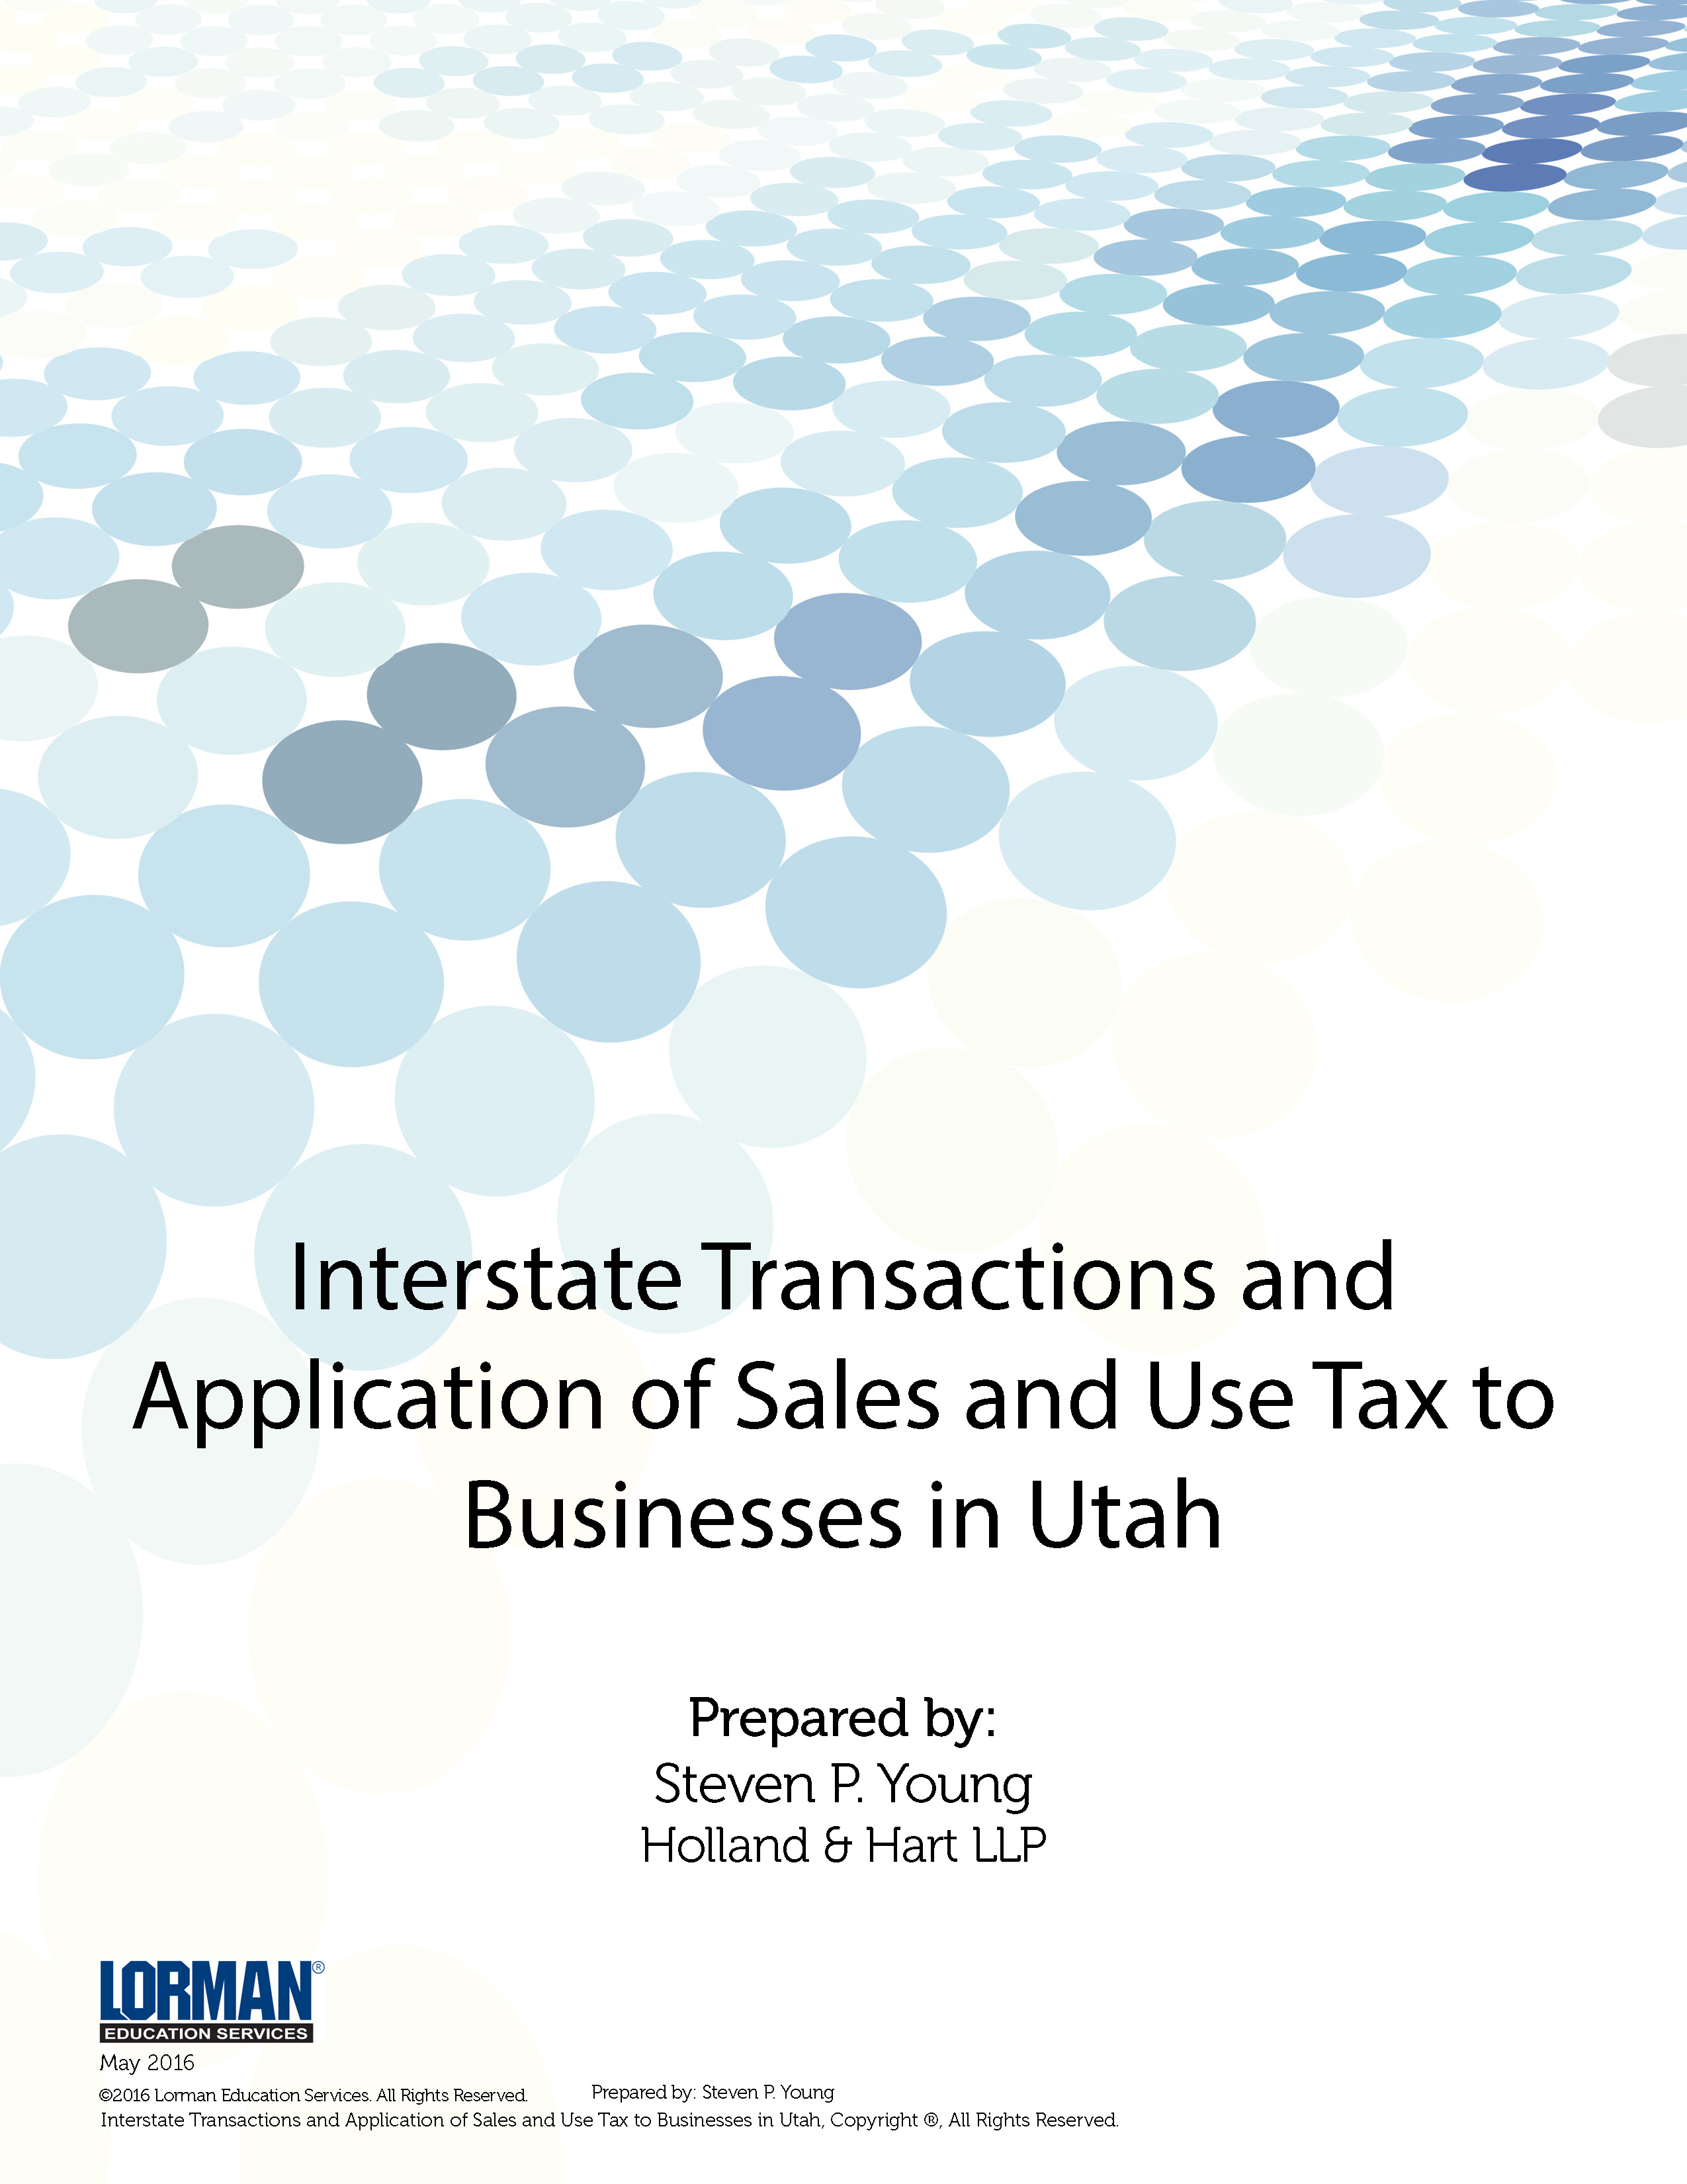 Interstate Transactions and Application of Sales and Use Tax to Businesses in Utah